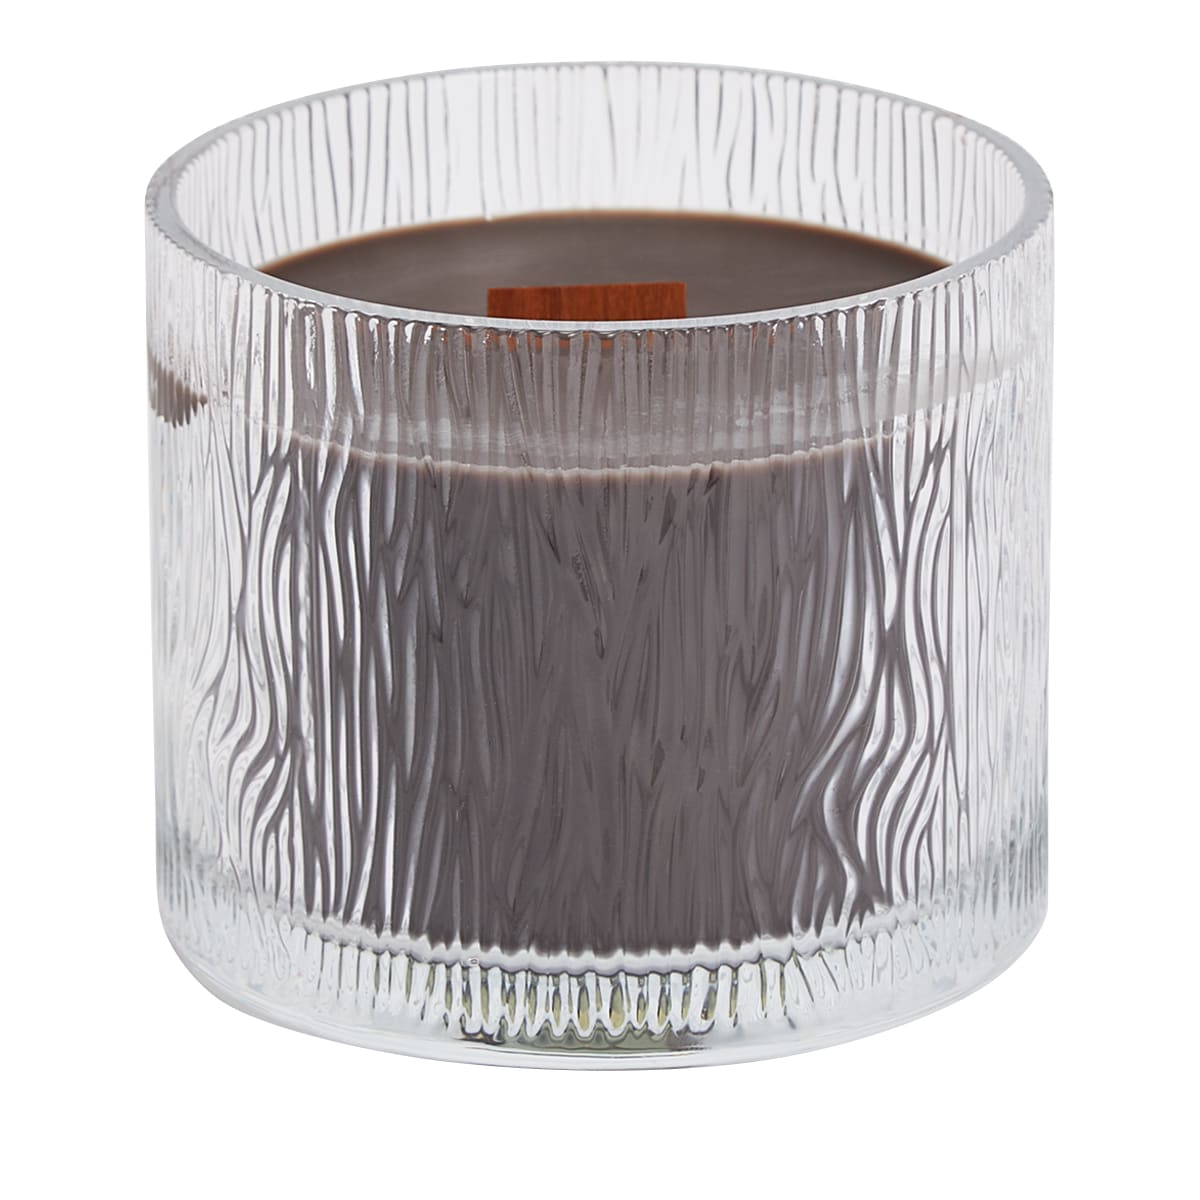 Nature's Light™ by PartyLite Leather Musk Jar Candle - PartyLite US